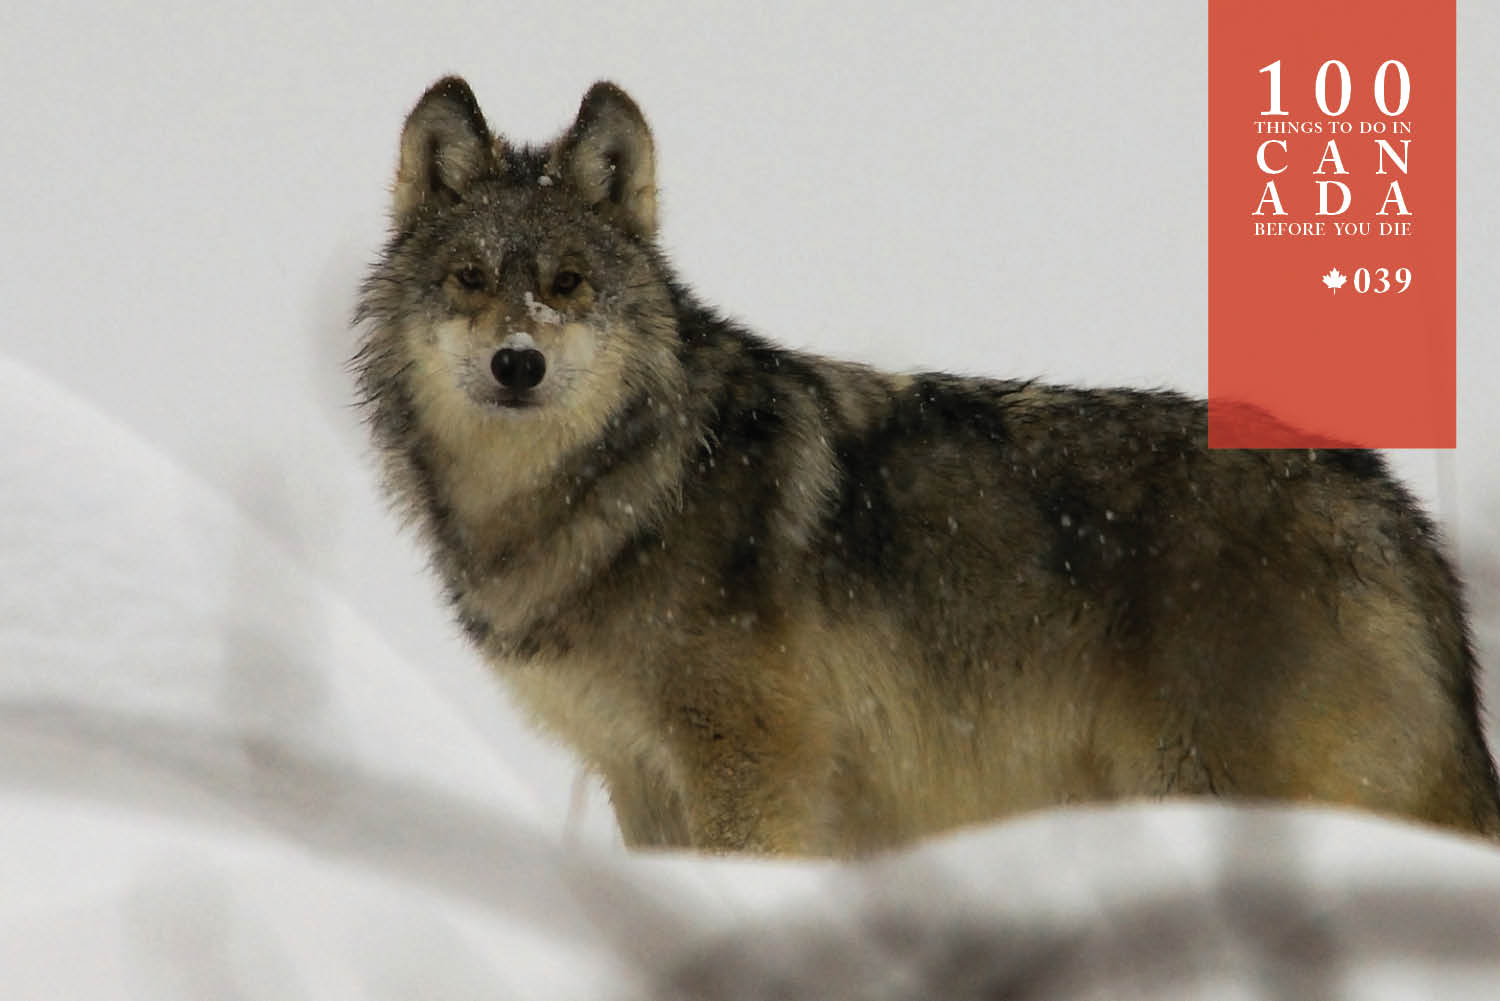 Learn how to howl with wolves in Canadian wilderness